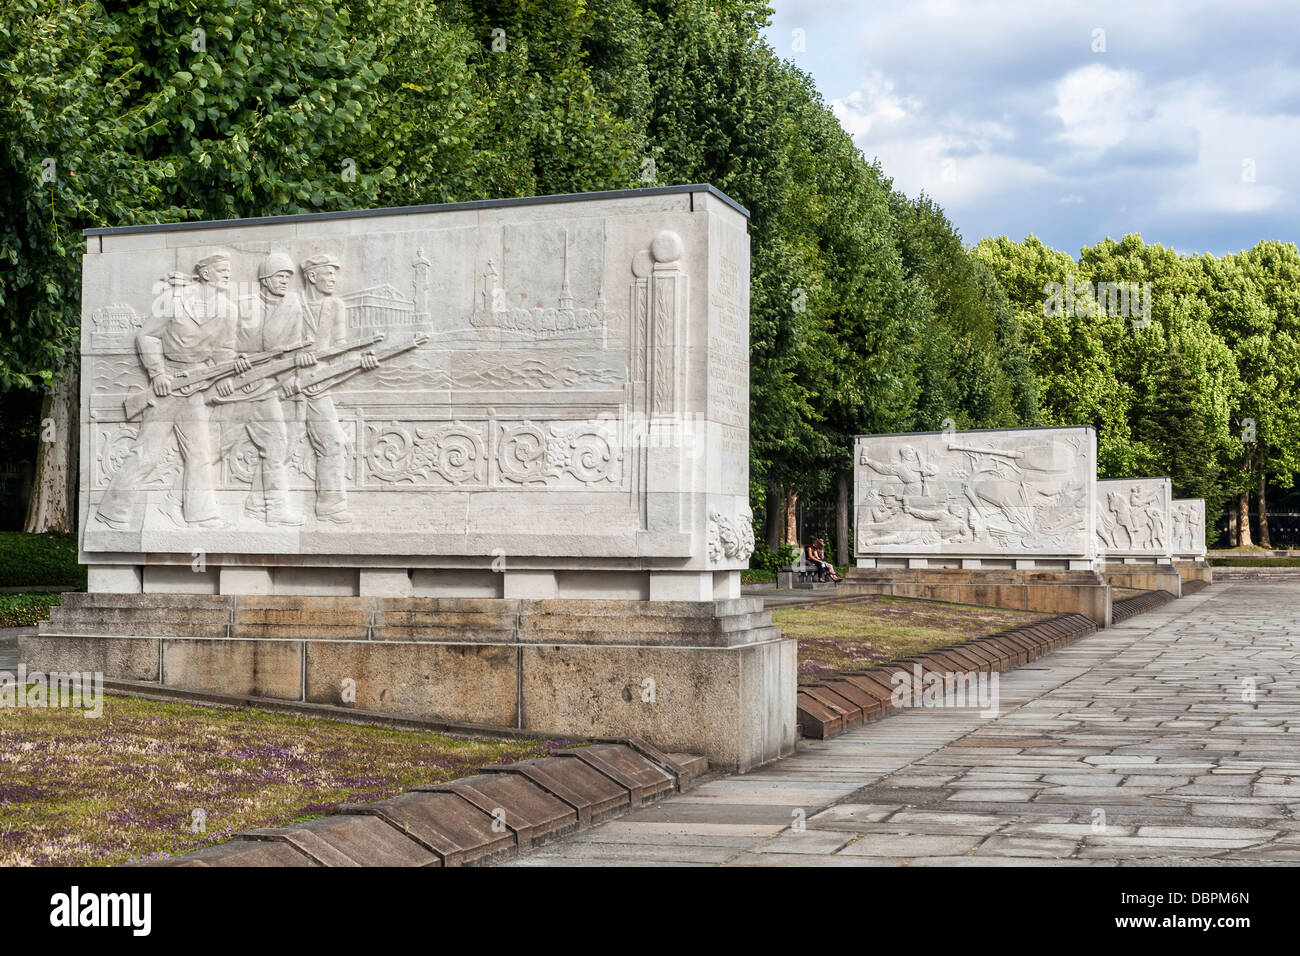 Soviet War Memorial, Treptower Park, Berlin. Sarcophagi bearing military scenes remember 7000 soldiers who died in WW2 Stock Photo